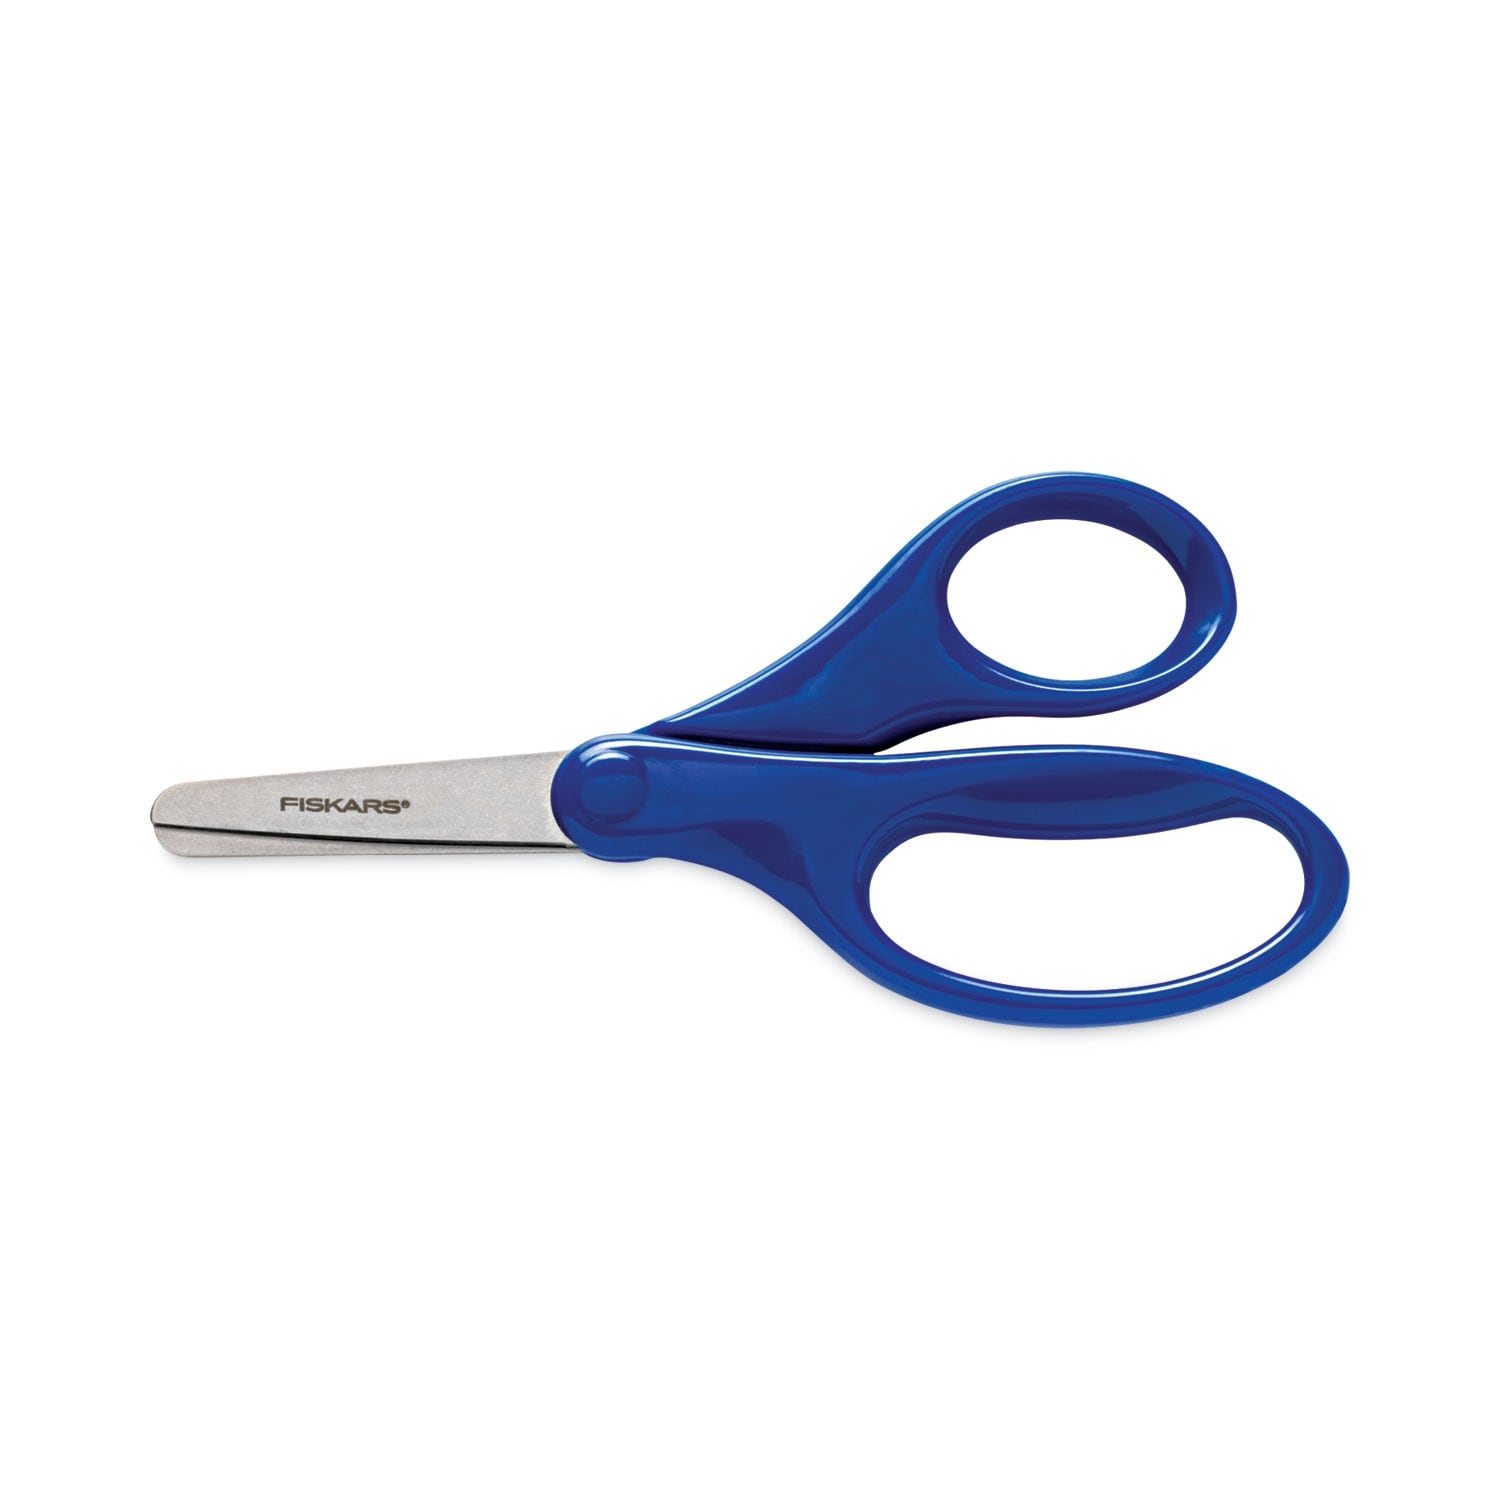 Kids/Student Scissors, Rounded Tip, Assorted Straight Handles